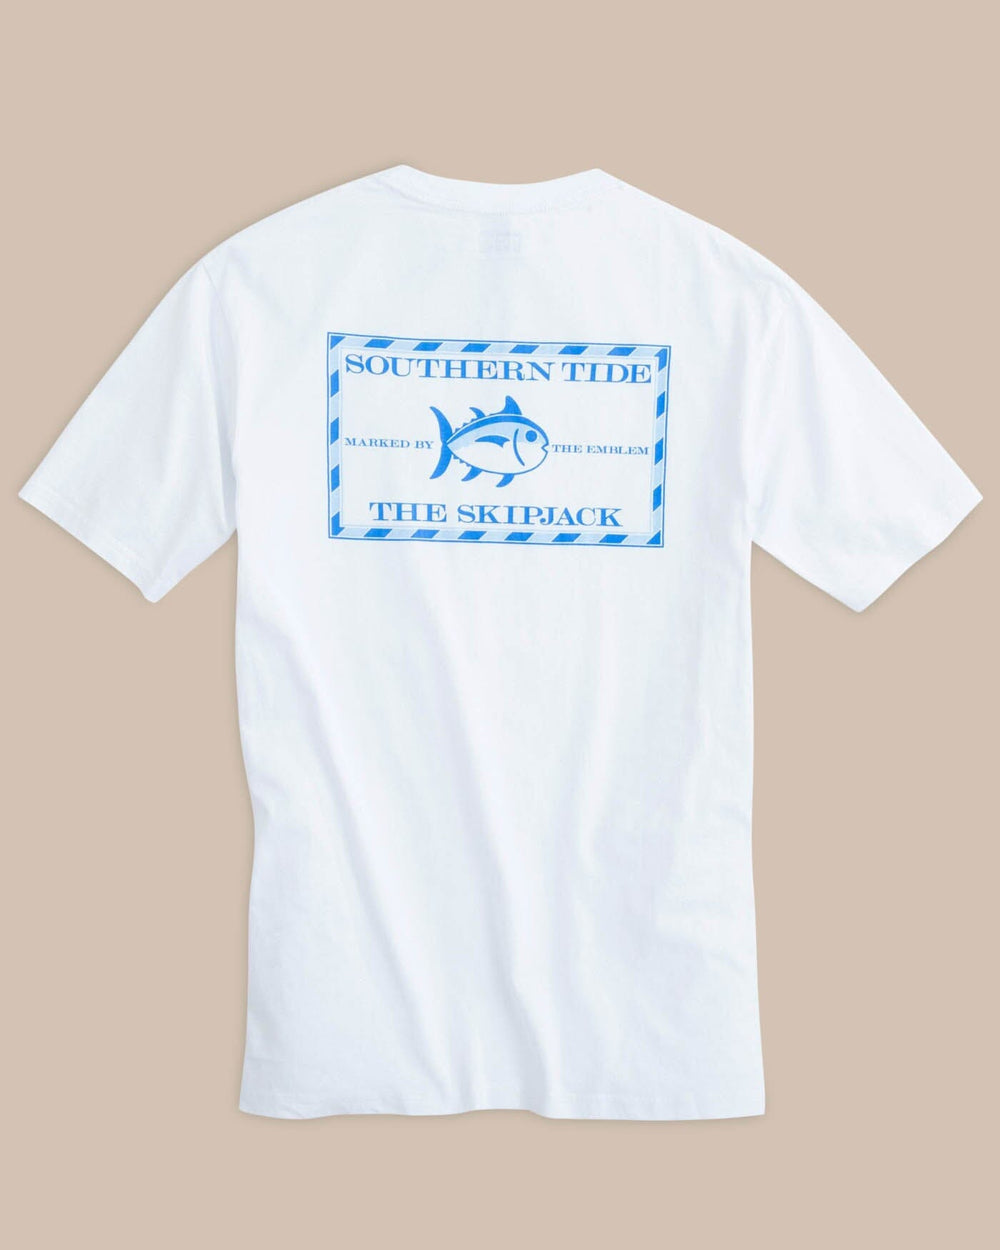 The back view of the Men's White Original Skipjack Short Sleeve T-Shirt by Southern Tide - White